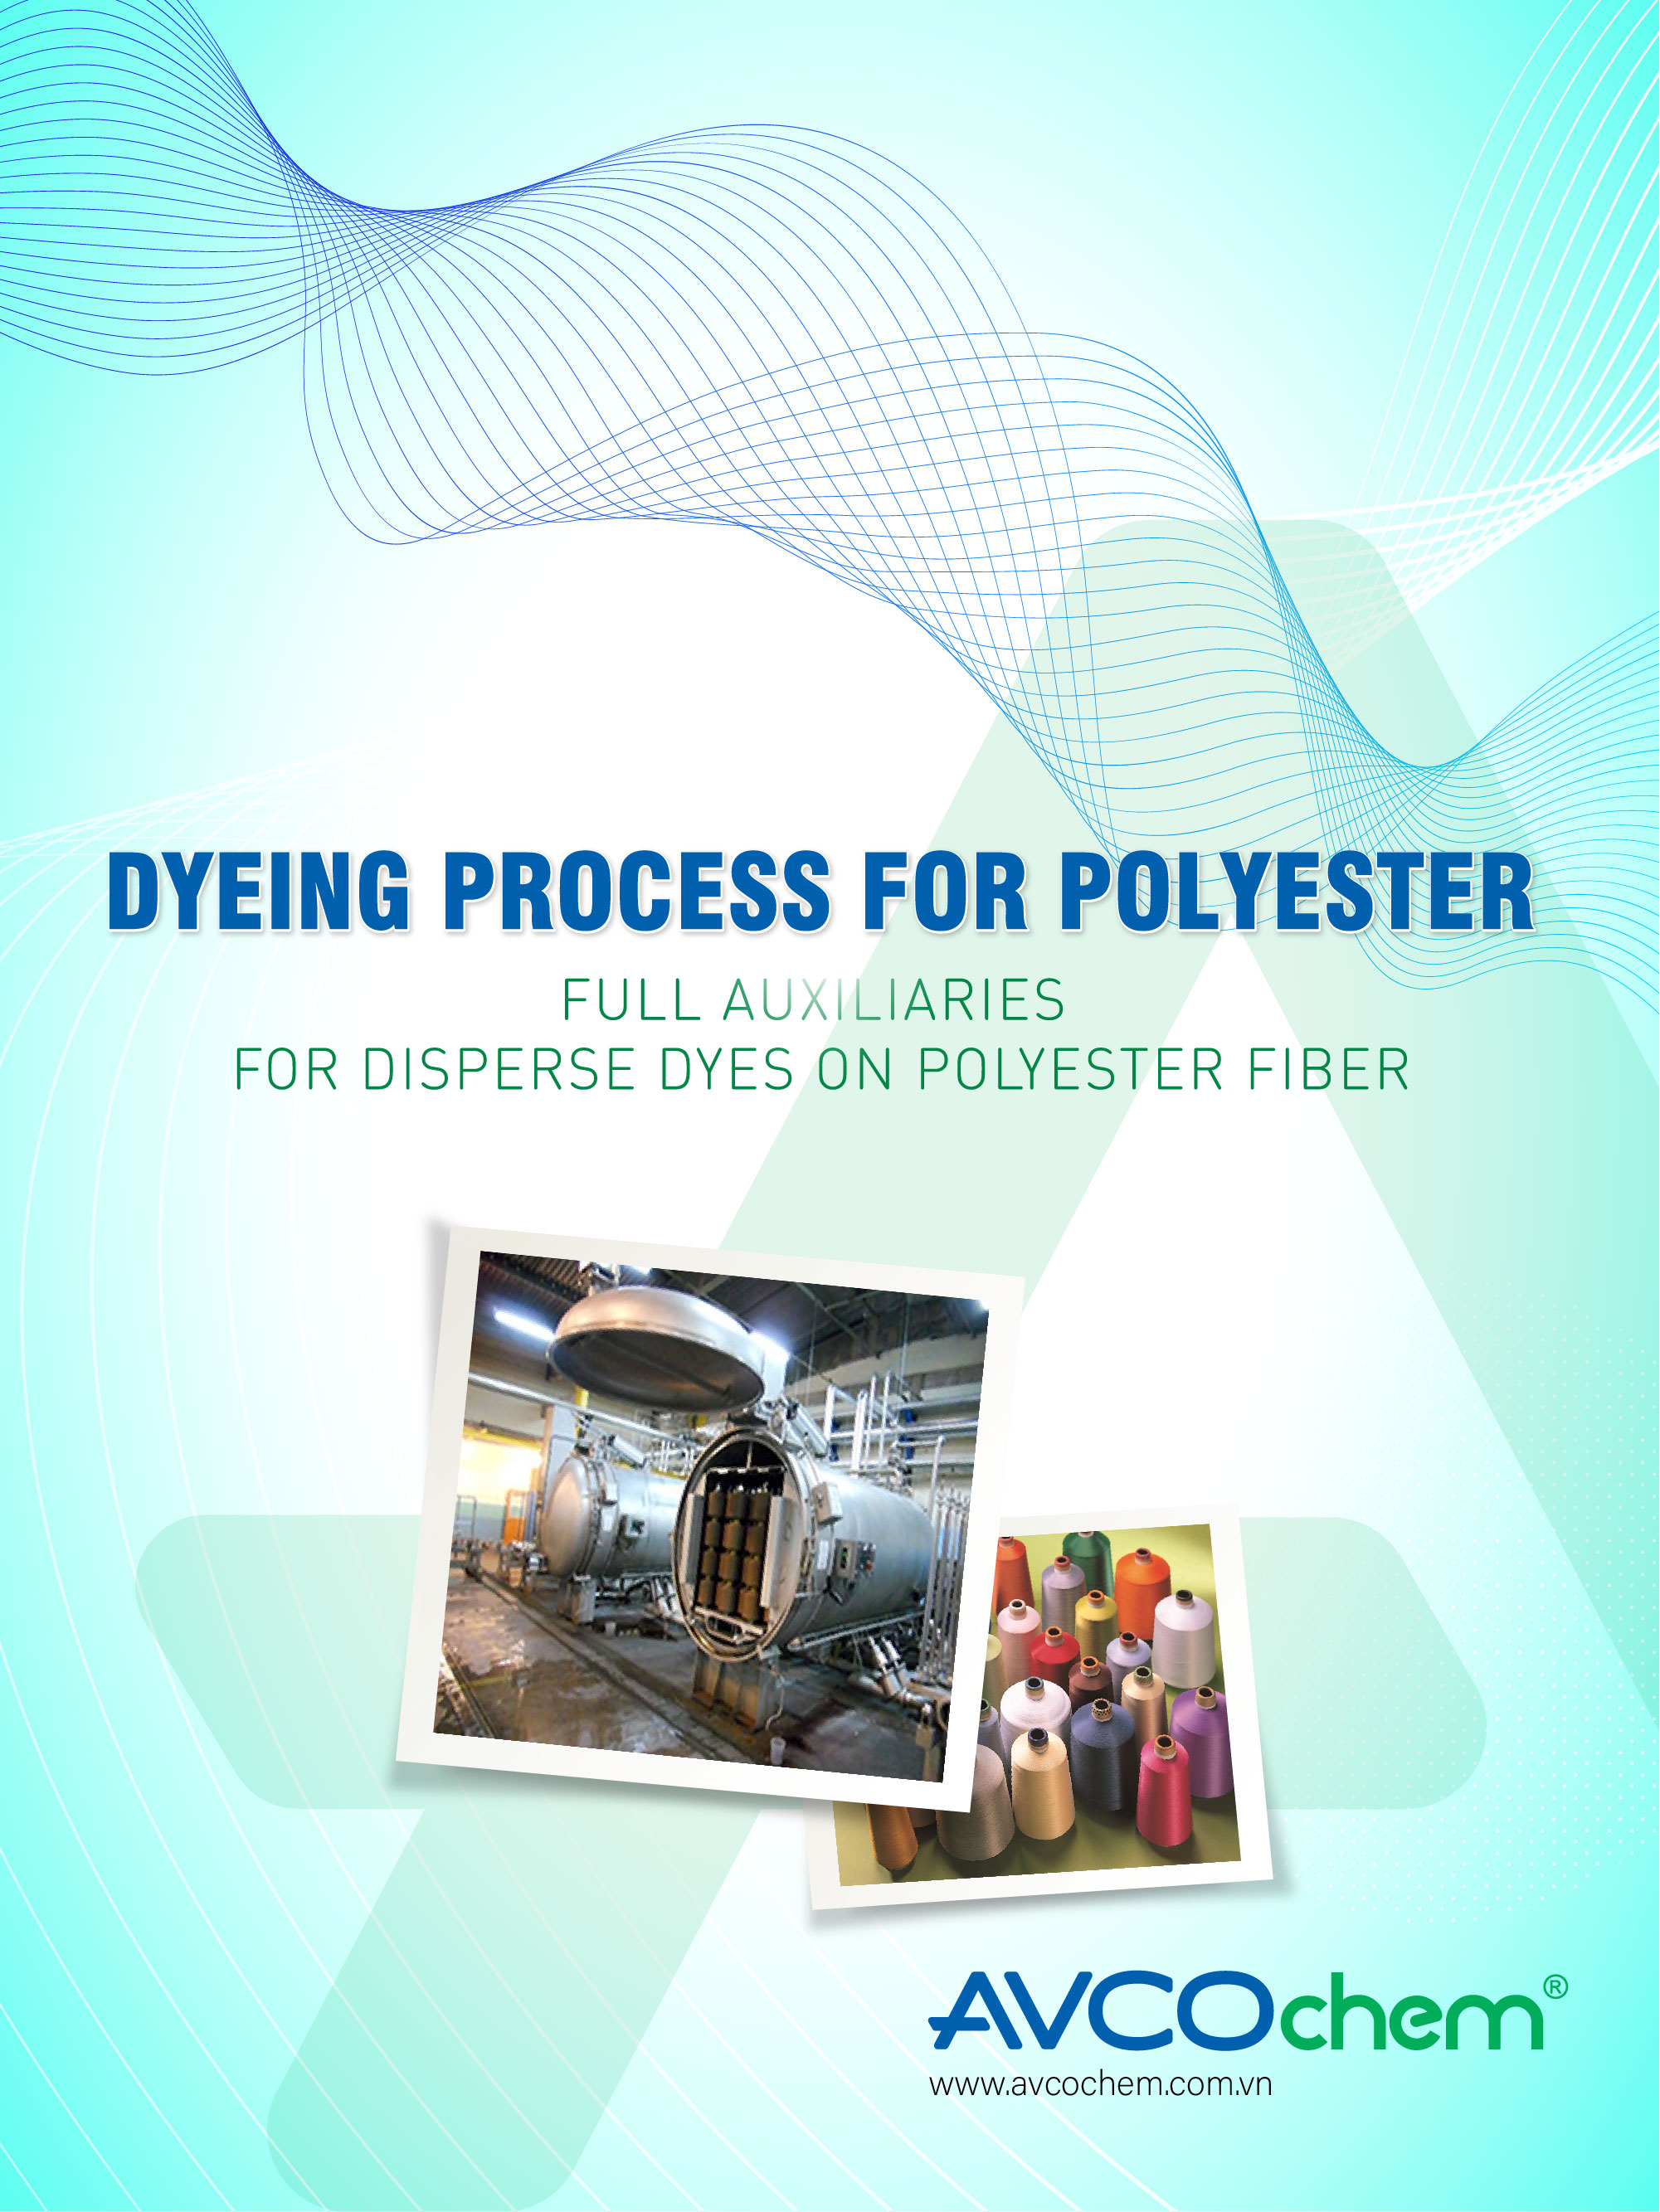 DYEING PROCESS FOR POLYESTER